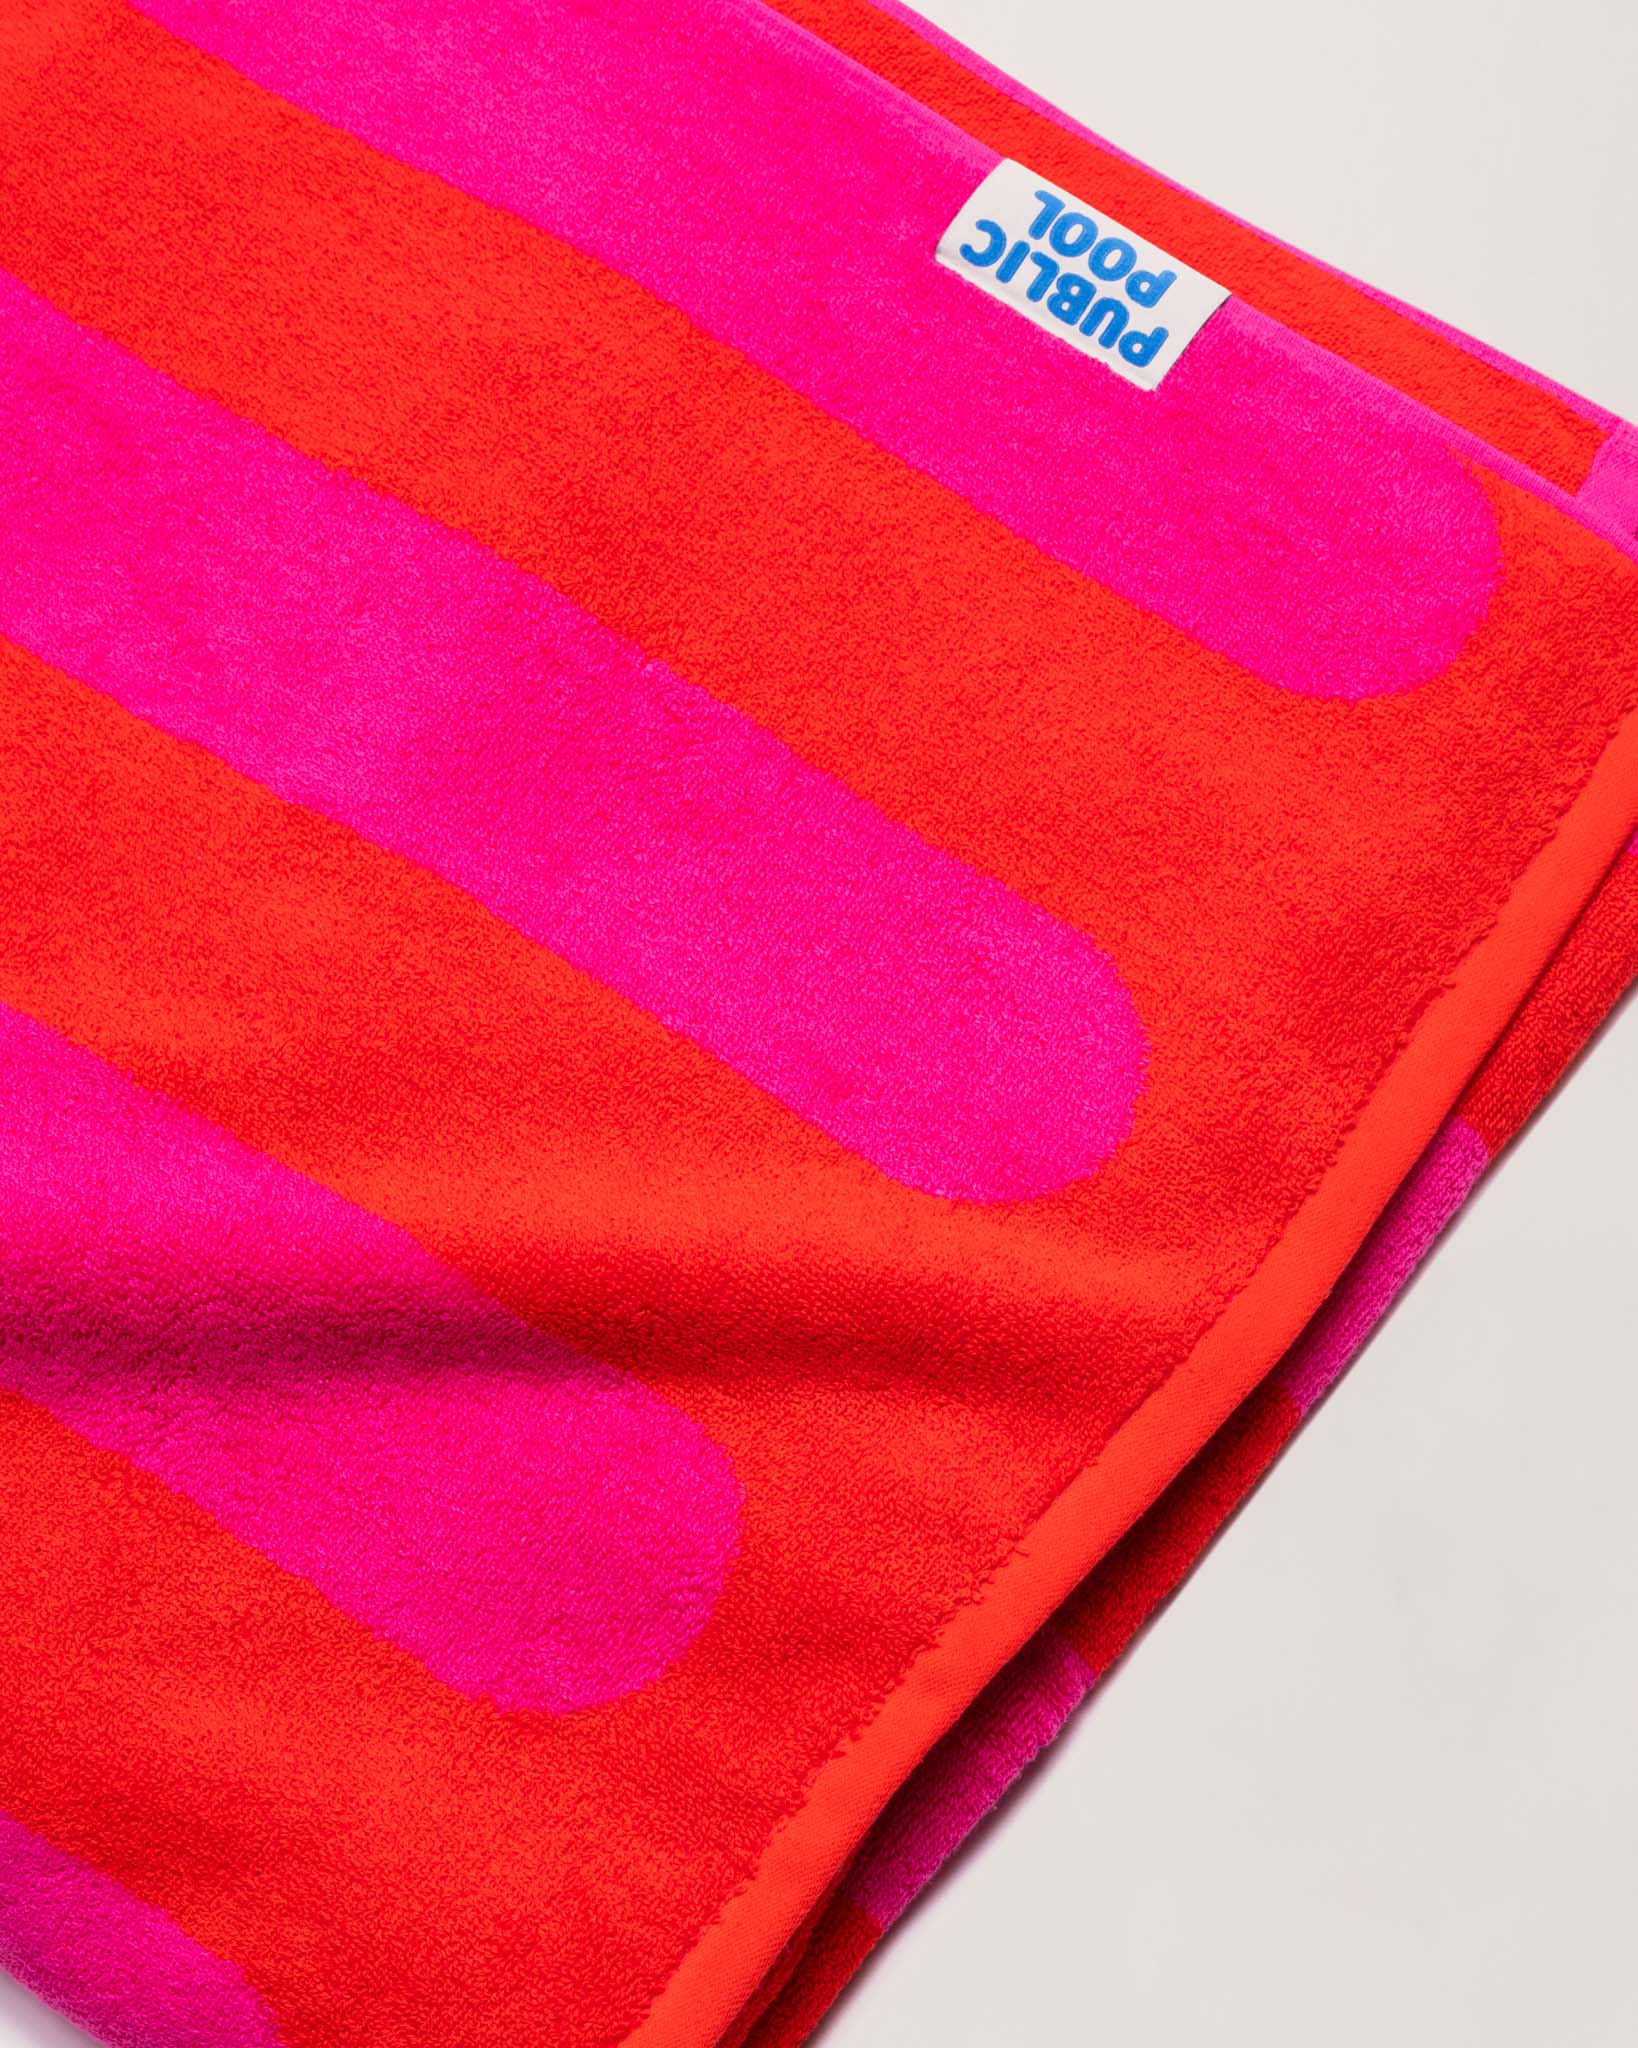 A folded red and magenta towel. 